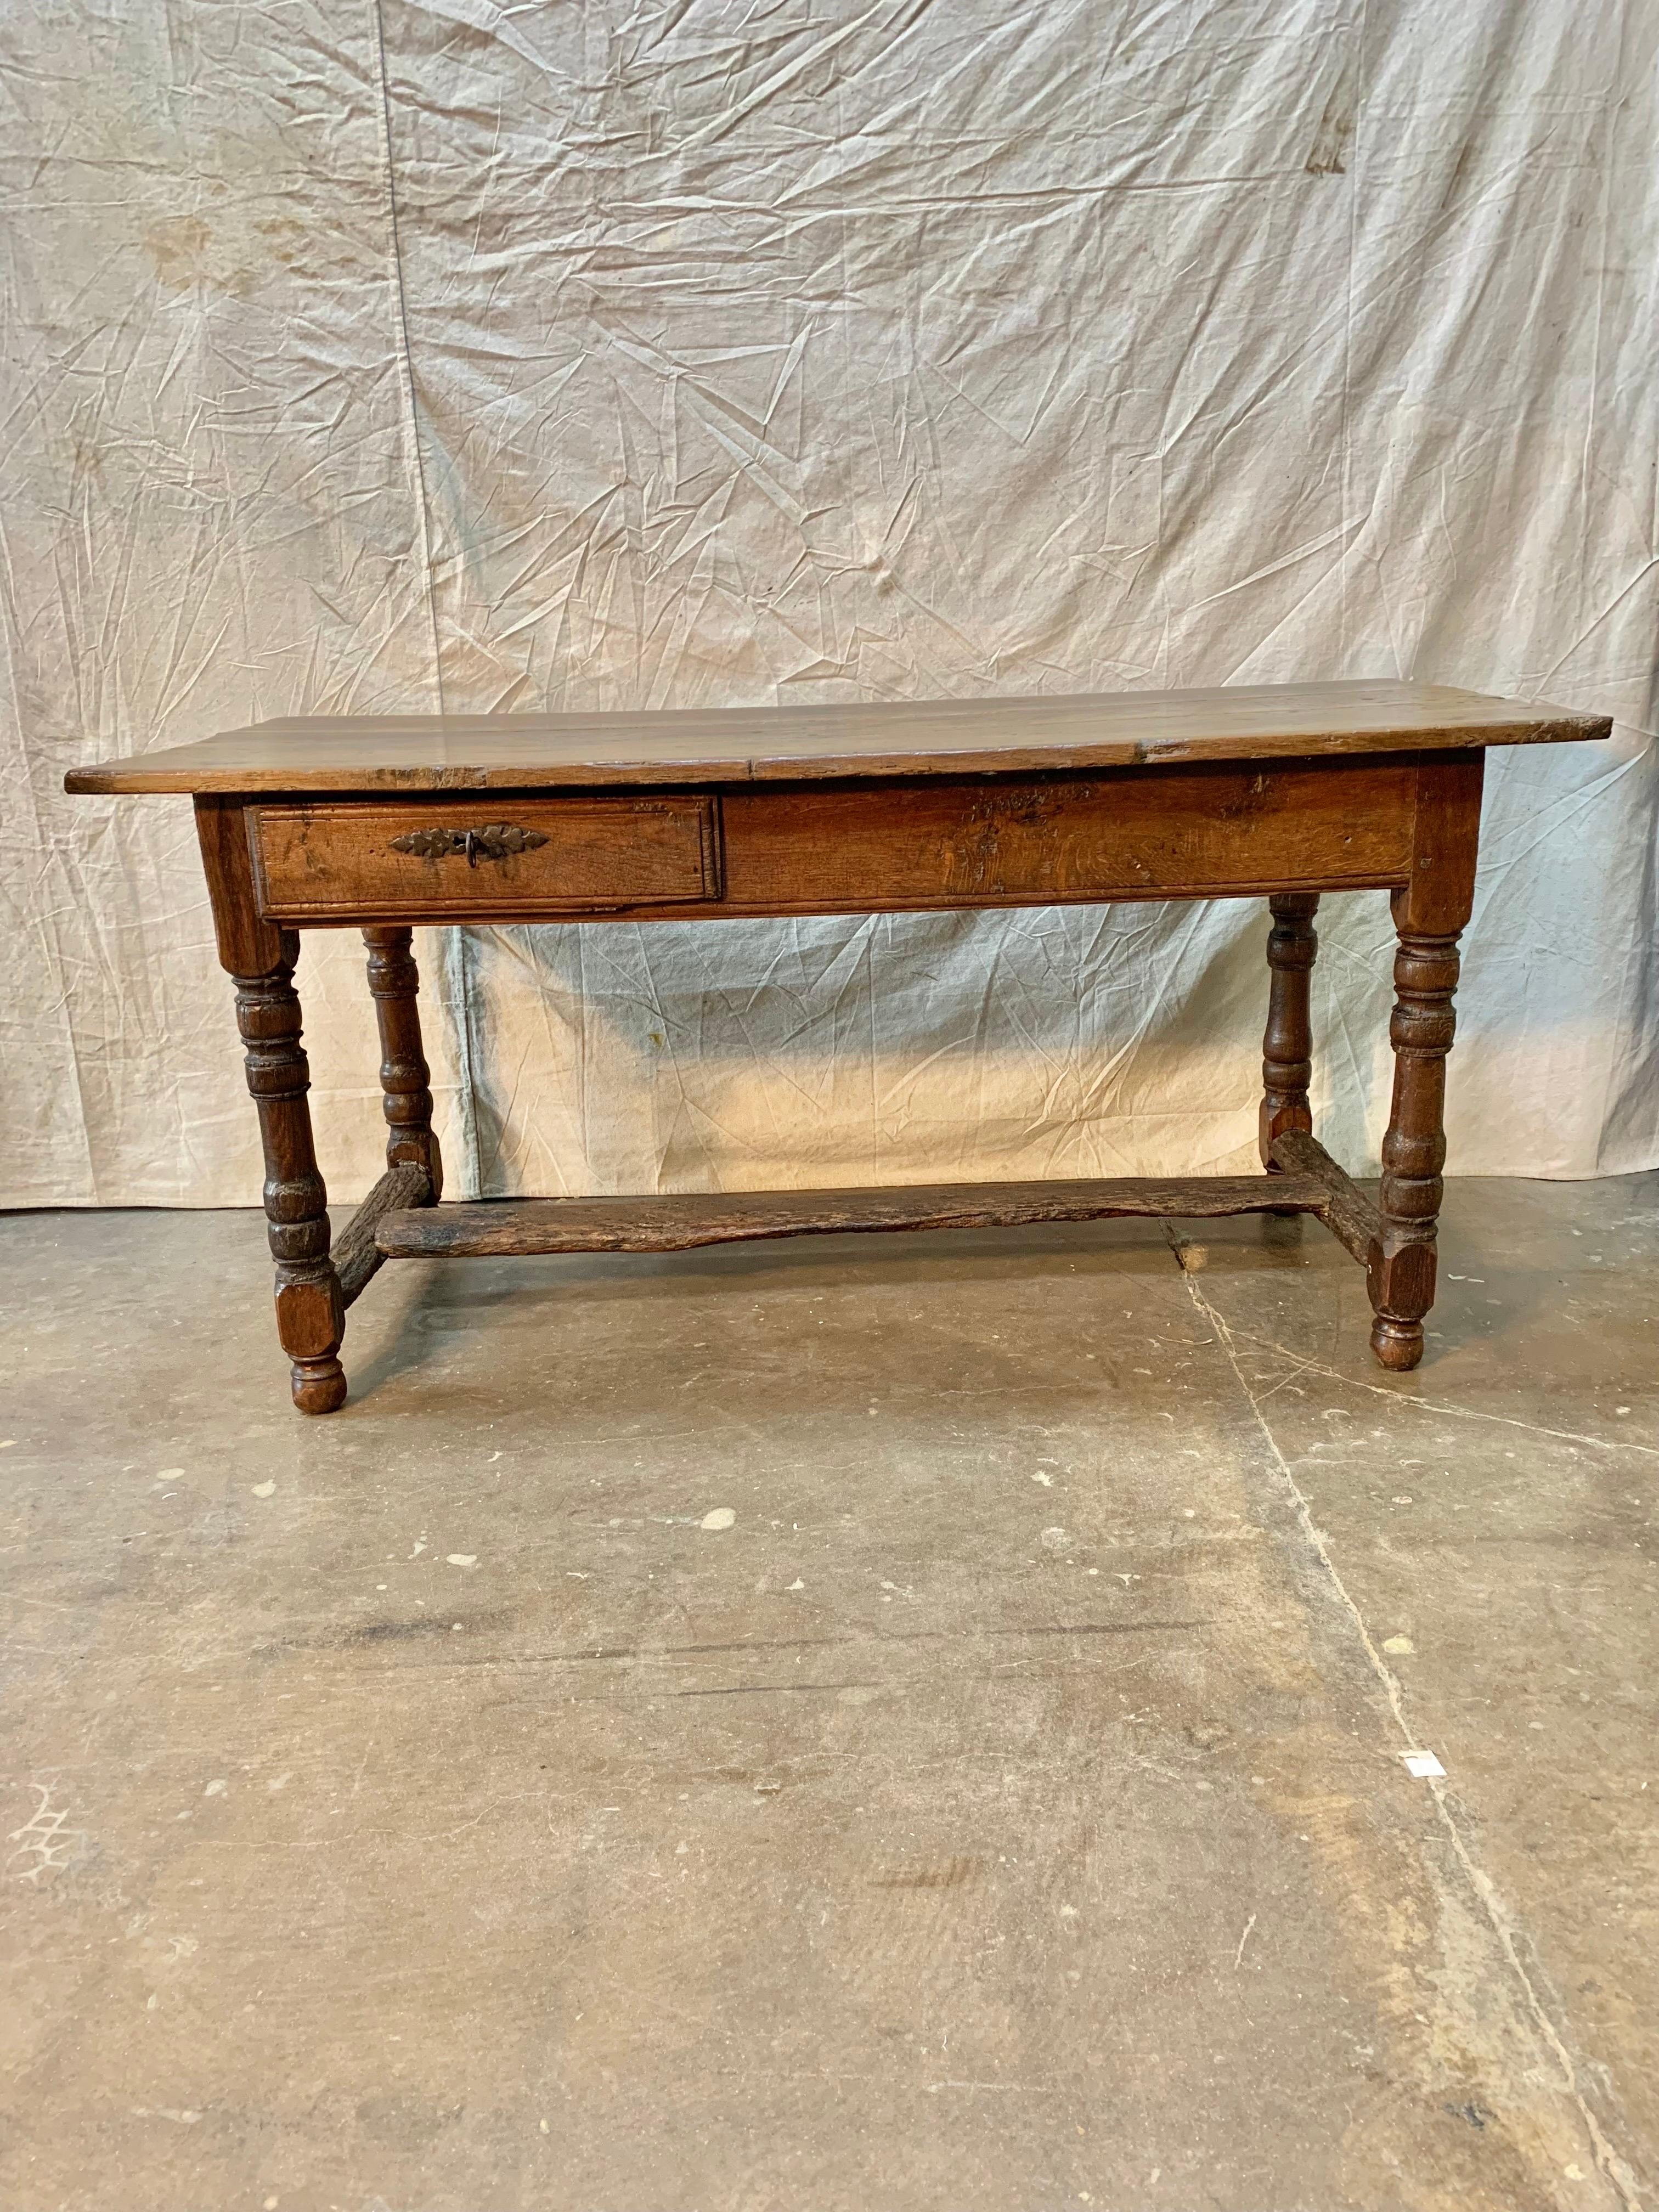 Found in the South of France, this French Bakers Table was handcrafted by artisans from old growth walnut. The piece features a three plank top resting above two drawers, one front drawer with its orginal working lock and key and an enlongated